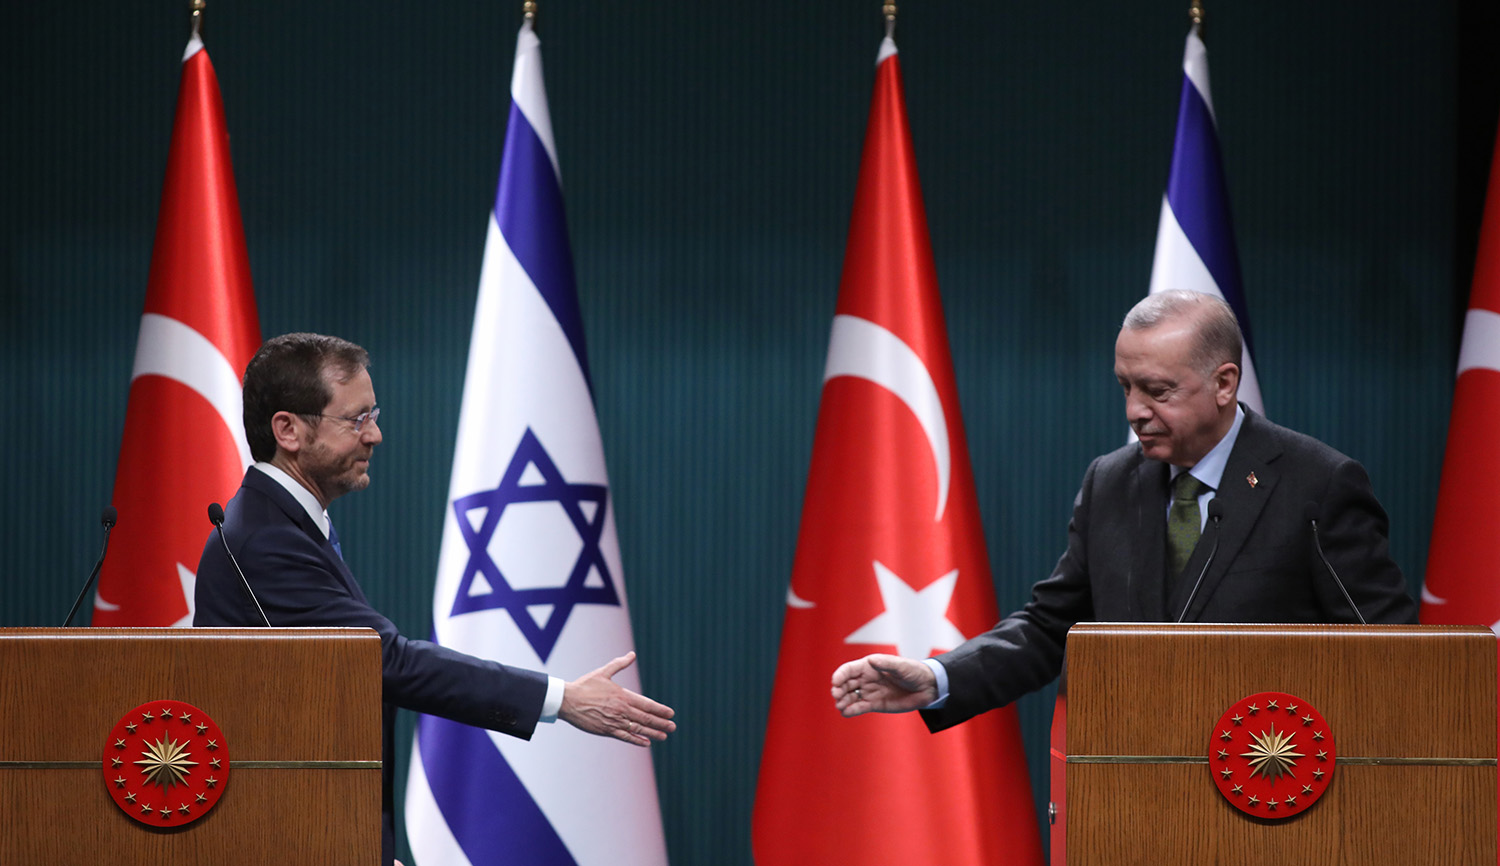 Can a Renewed Alliance Between Israel and Turkey Stabilize the Middle East?